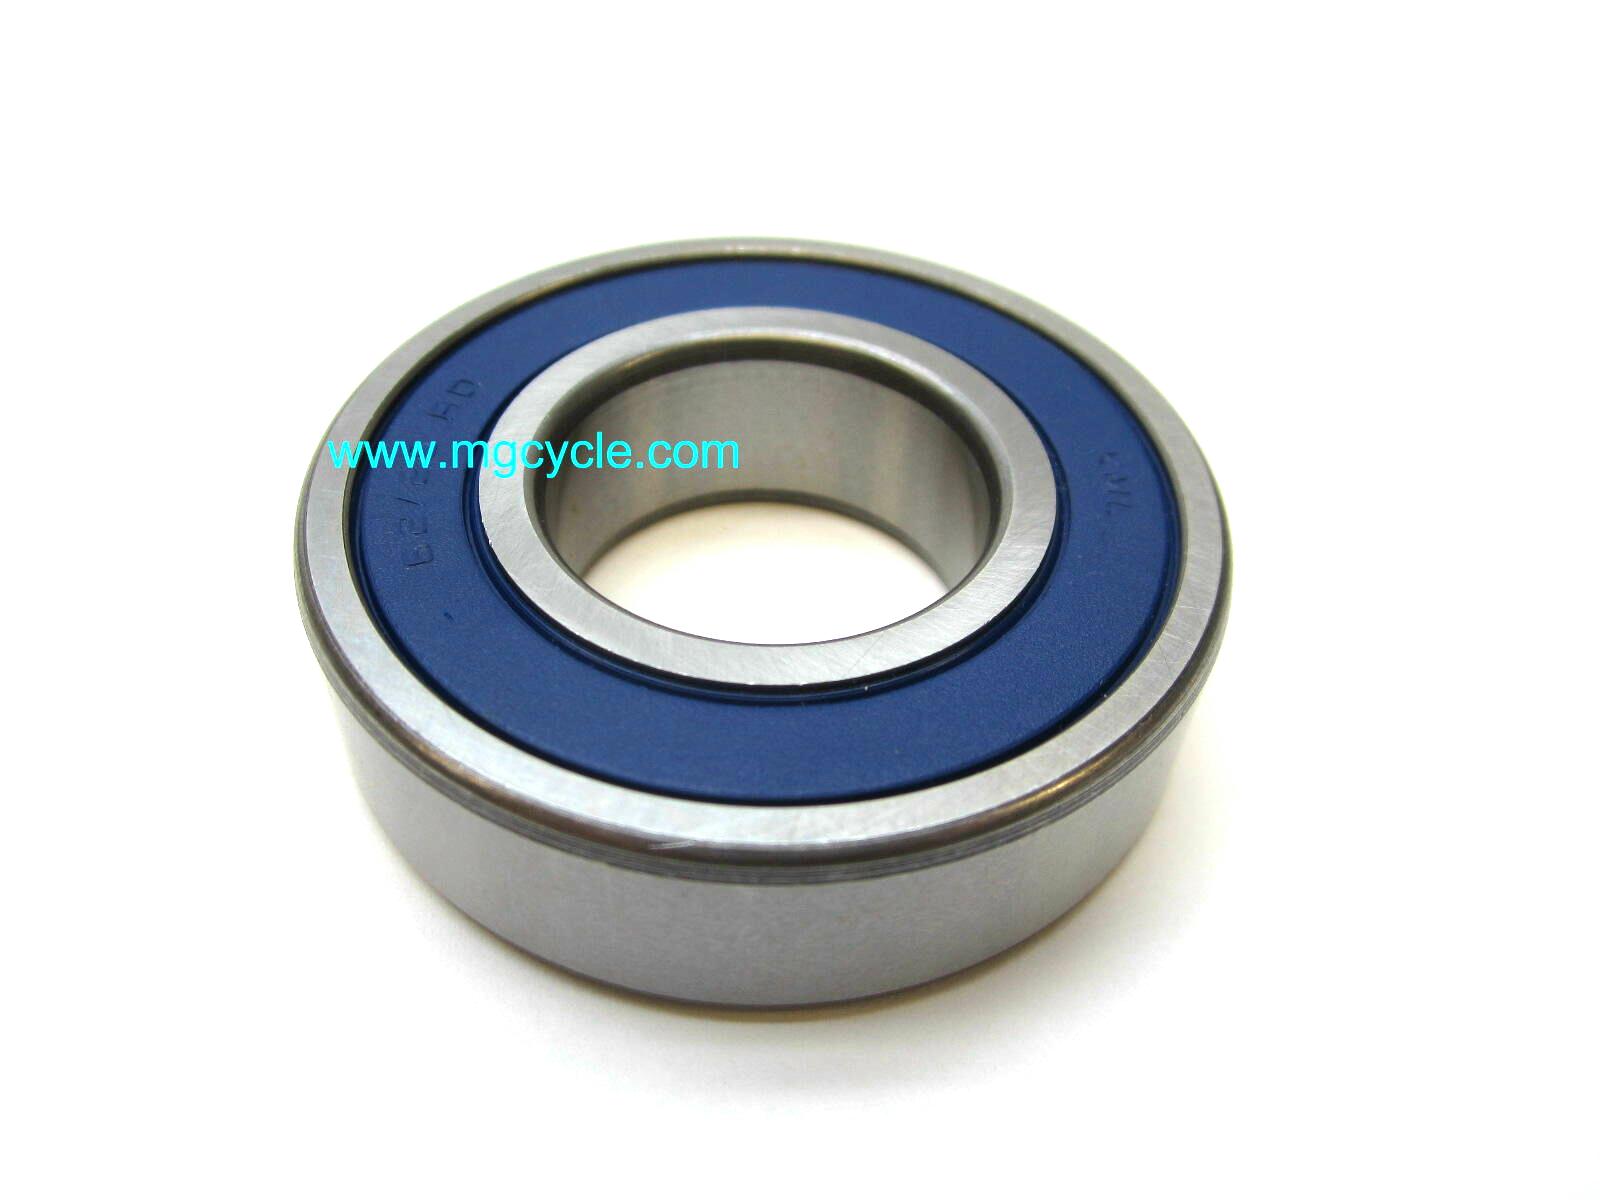 U-Joint carrier bearing for most 1976-2002, also CARC GU92204230